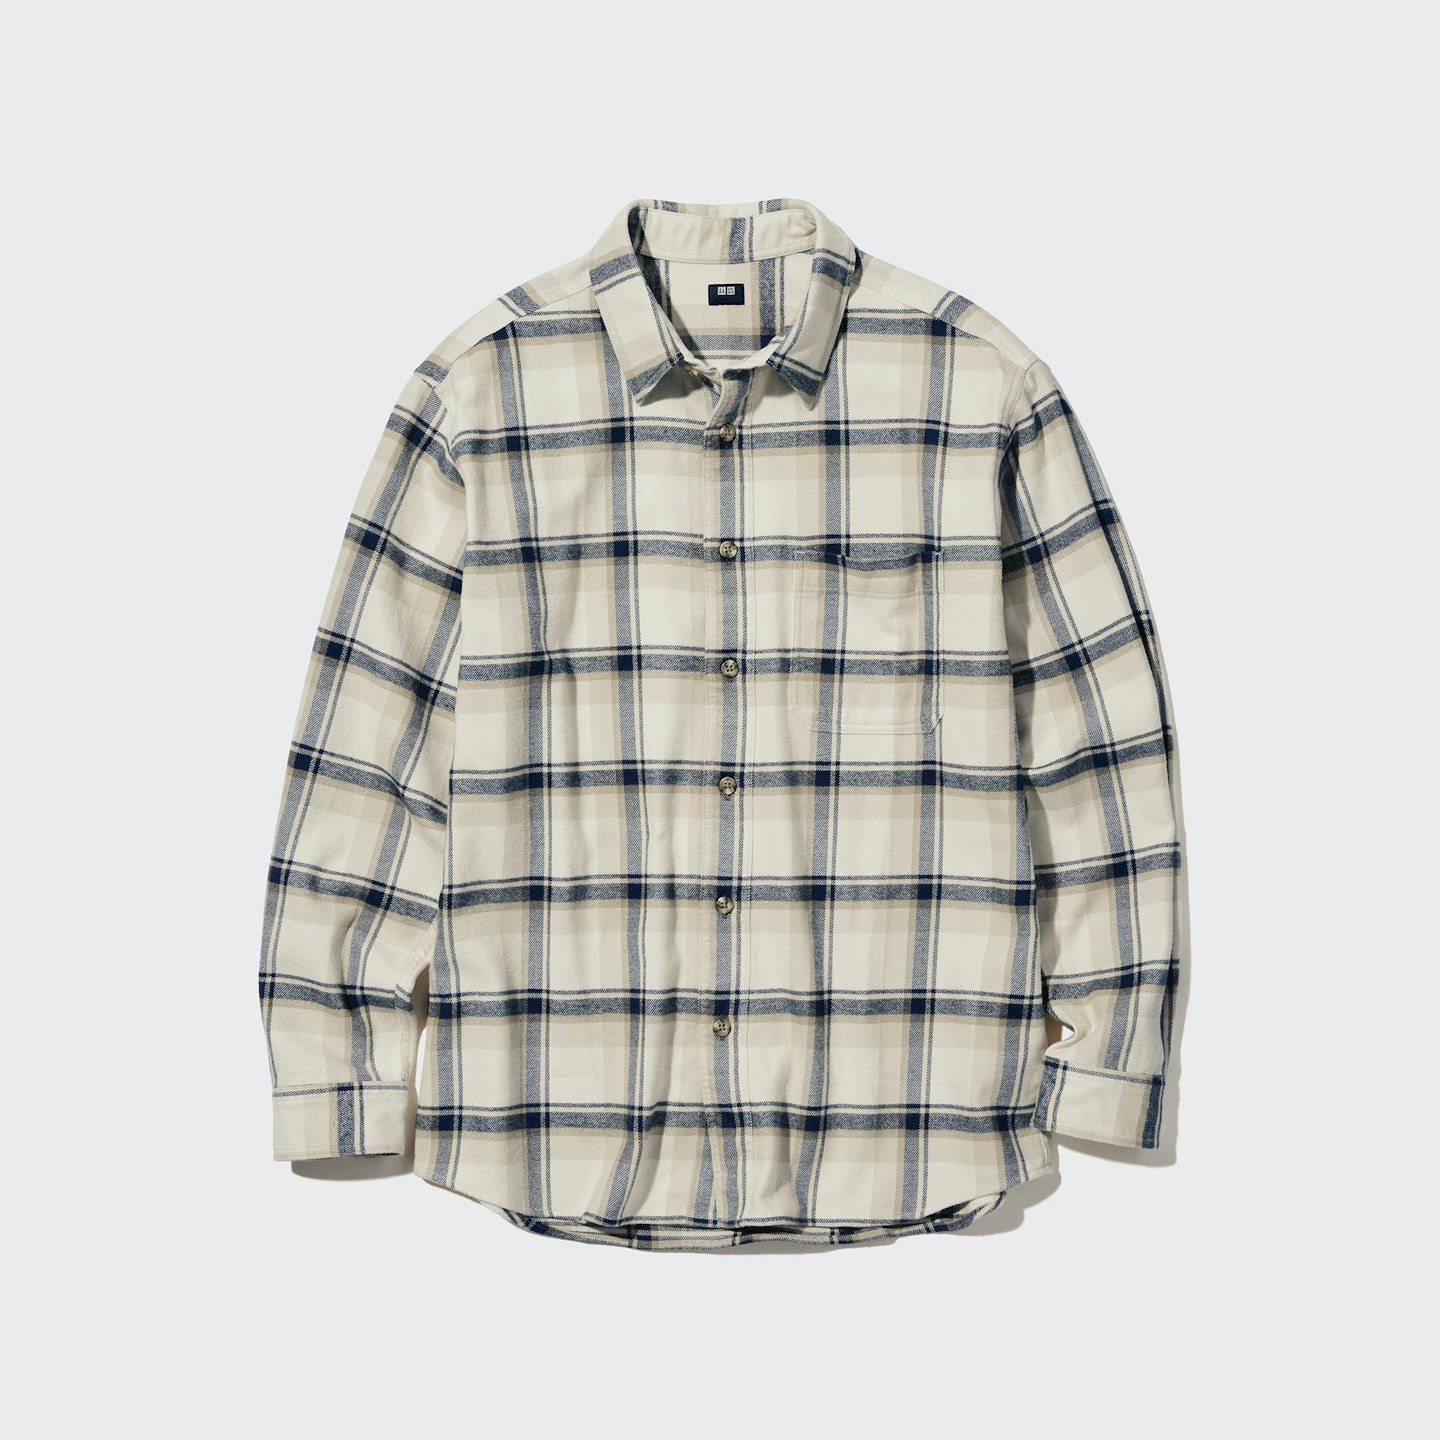 Uniqlo, Flannel Checked Regular Fit Shirt